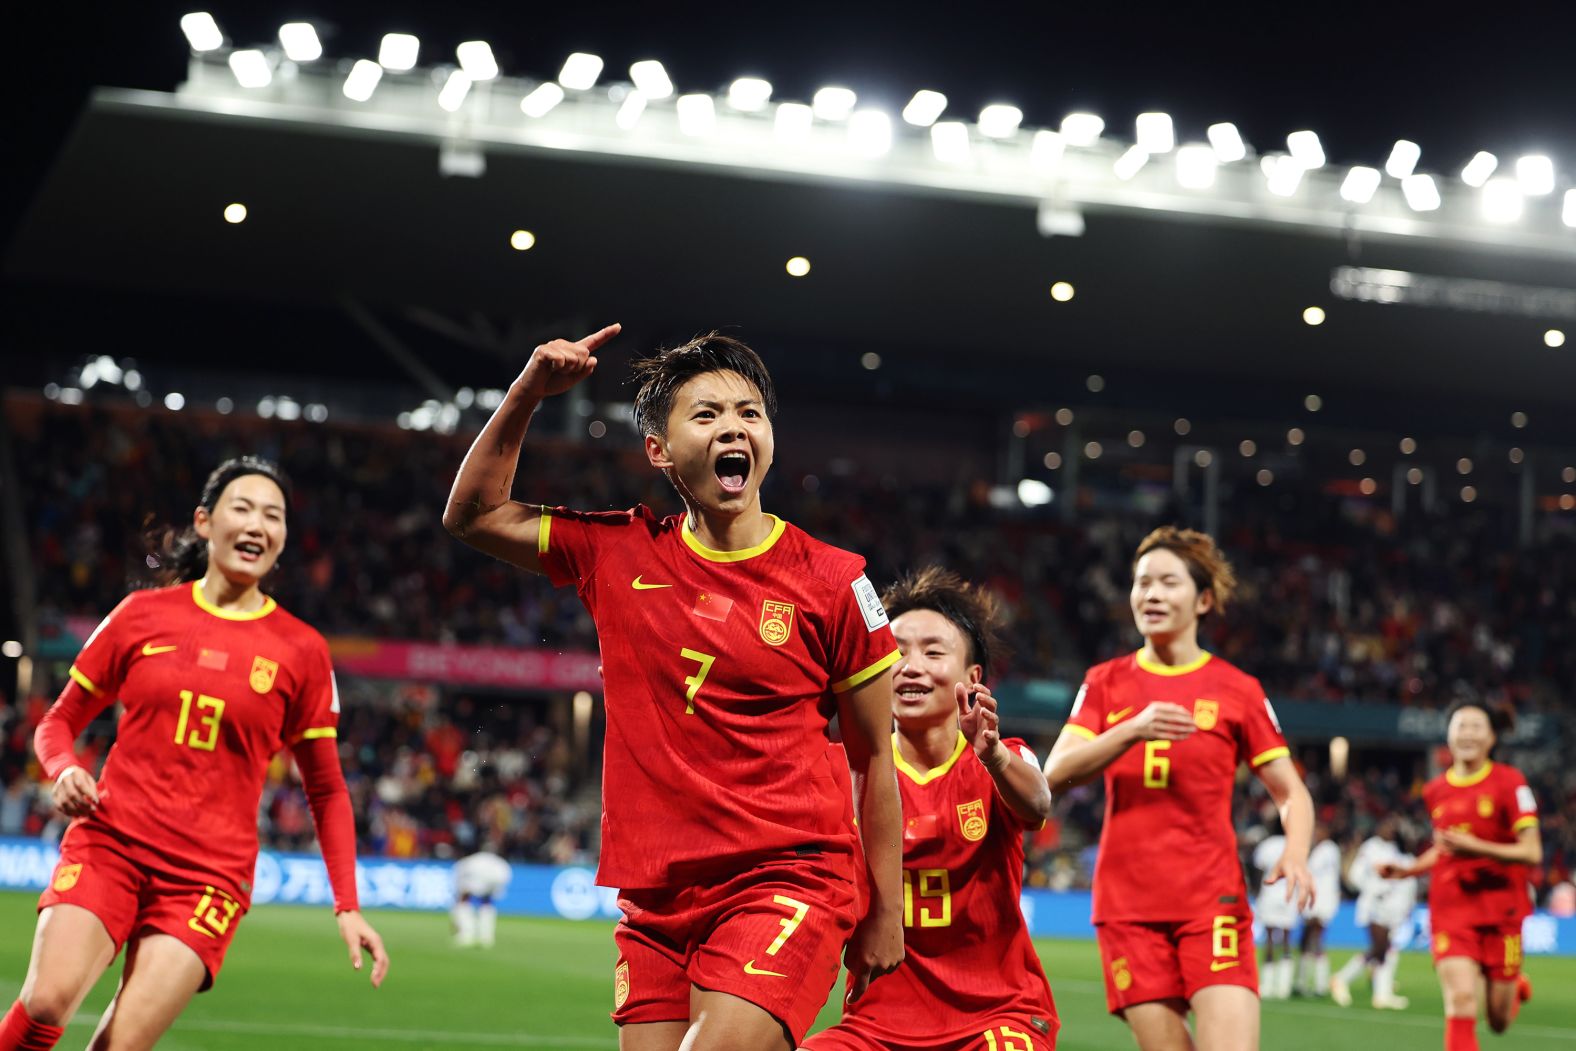 China's Wang Shuang celebrates after scoring against Haiti on July 28. <a href="index.php?page=&url=https%3A%2F%2Fwww.cnn.com%2F2023%2F07%2F28%2Fsport%2Fchina-womens-soccer-team-ambitions-wwc-intl-hnk-spt%2Findex.html" target="_blank">China won 1-0</a>.